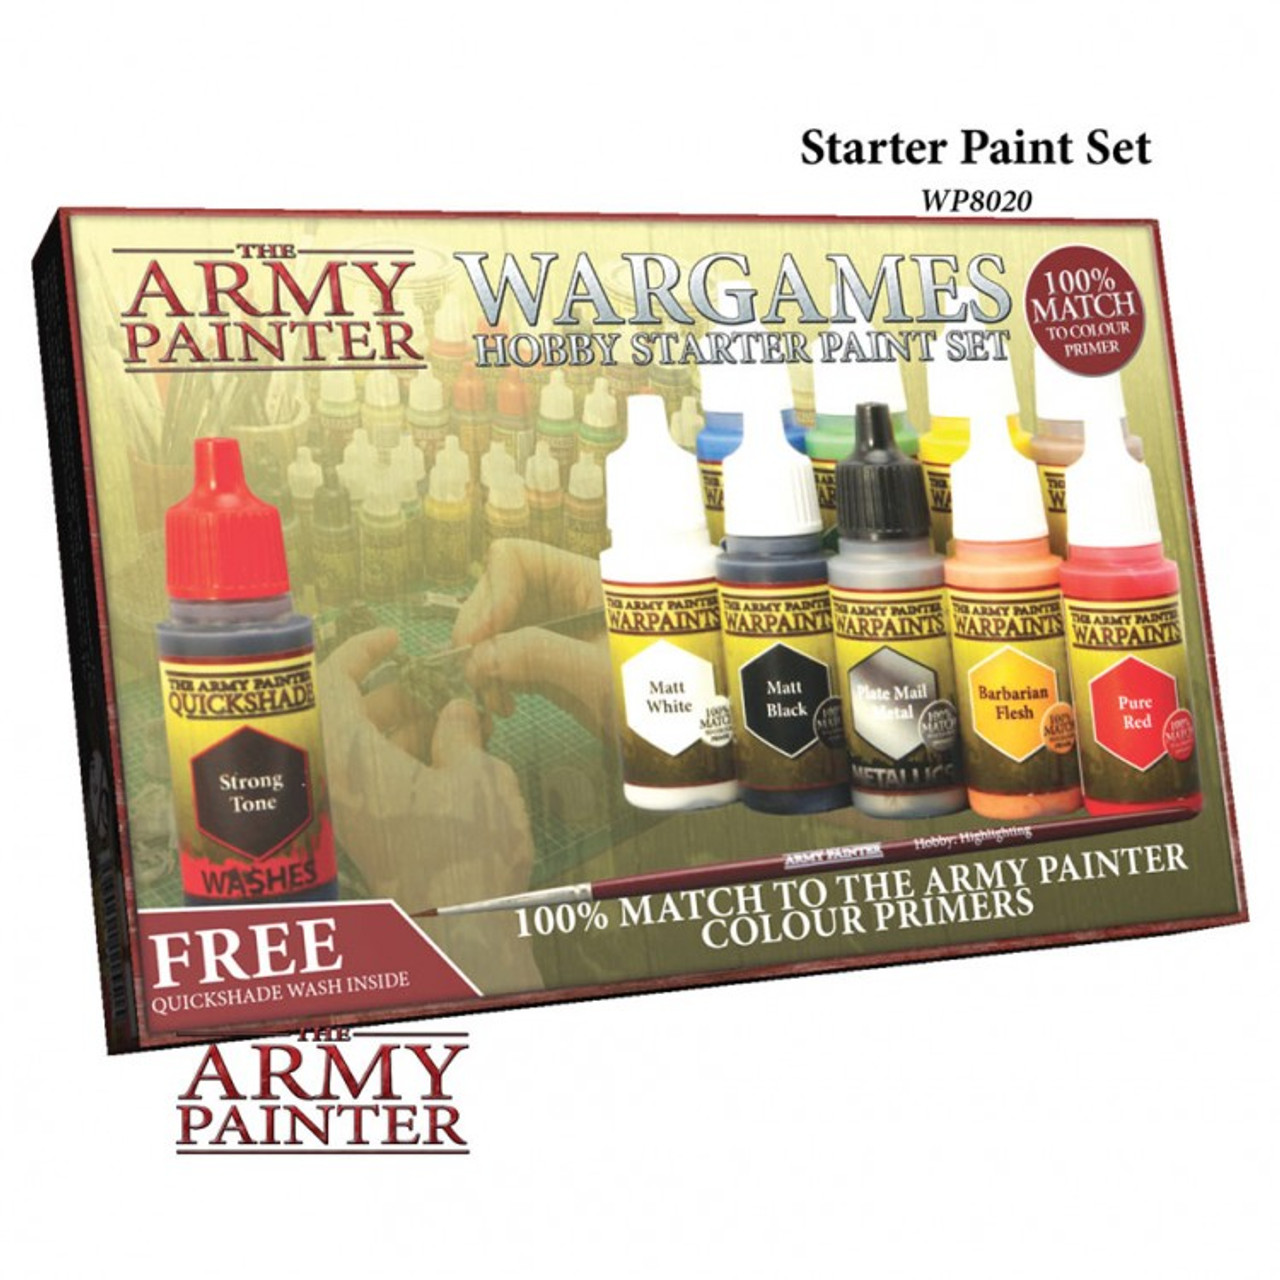 New: The Army Painter Warpaints - 2017 Sets now available